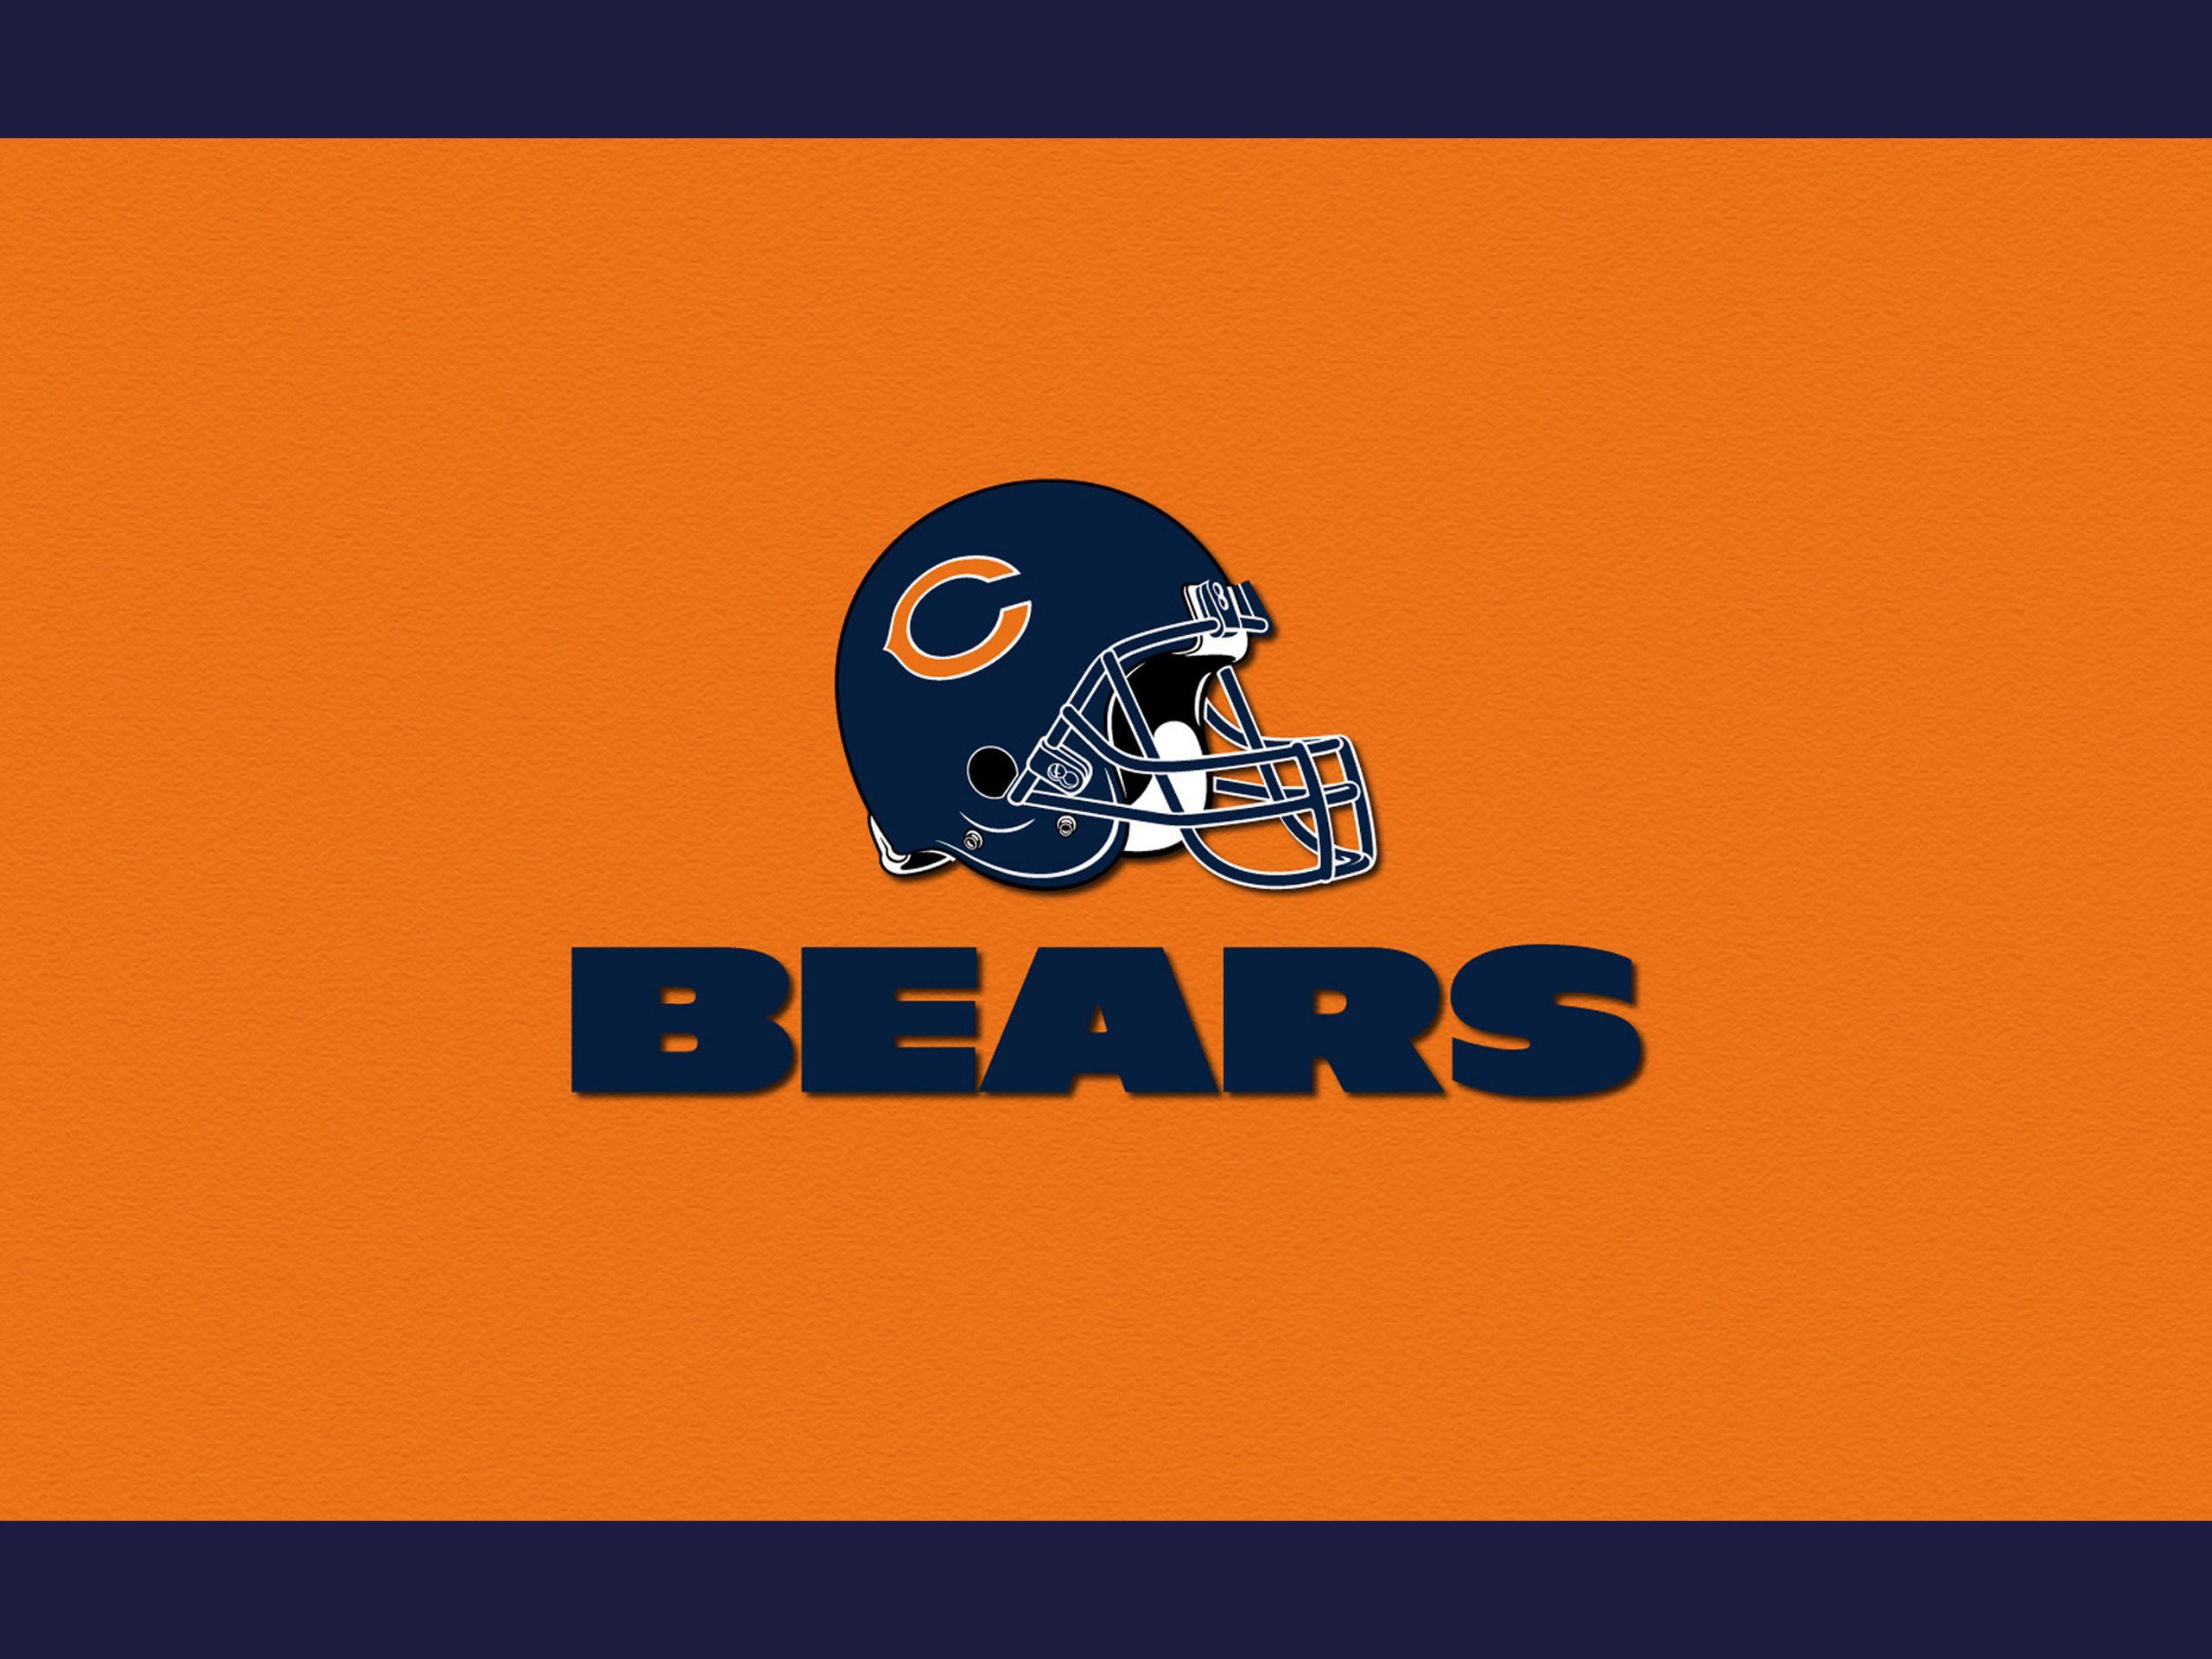 Chicago Bears Wallpapers 2017 - Wallpaper Cave